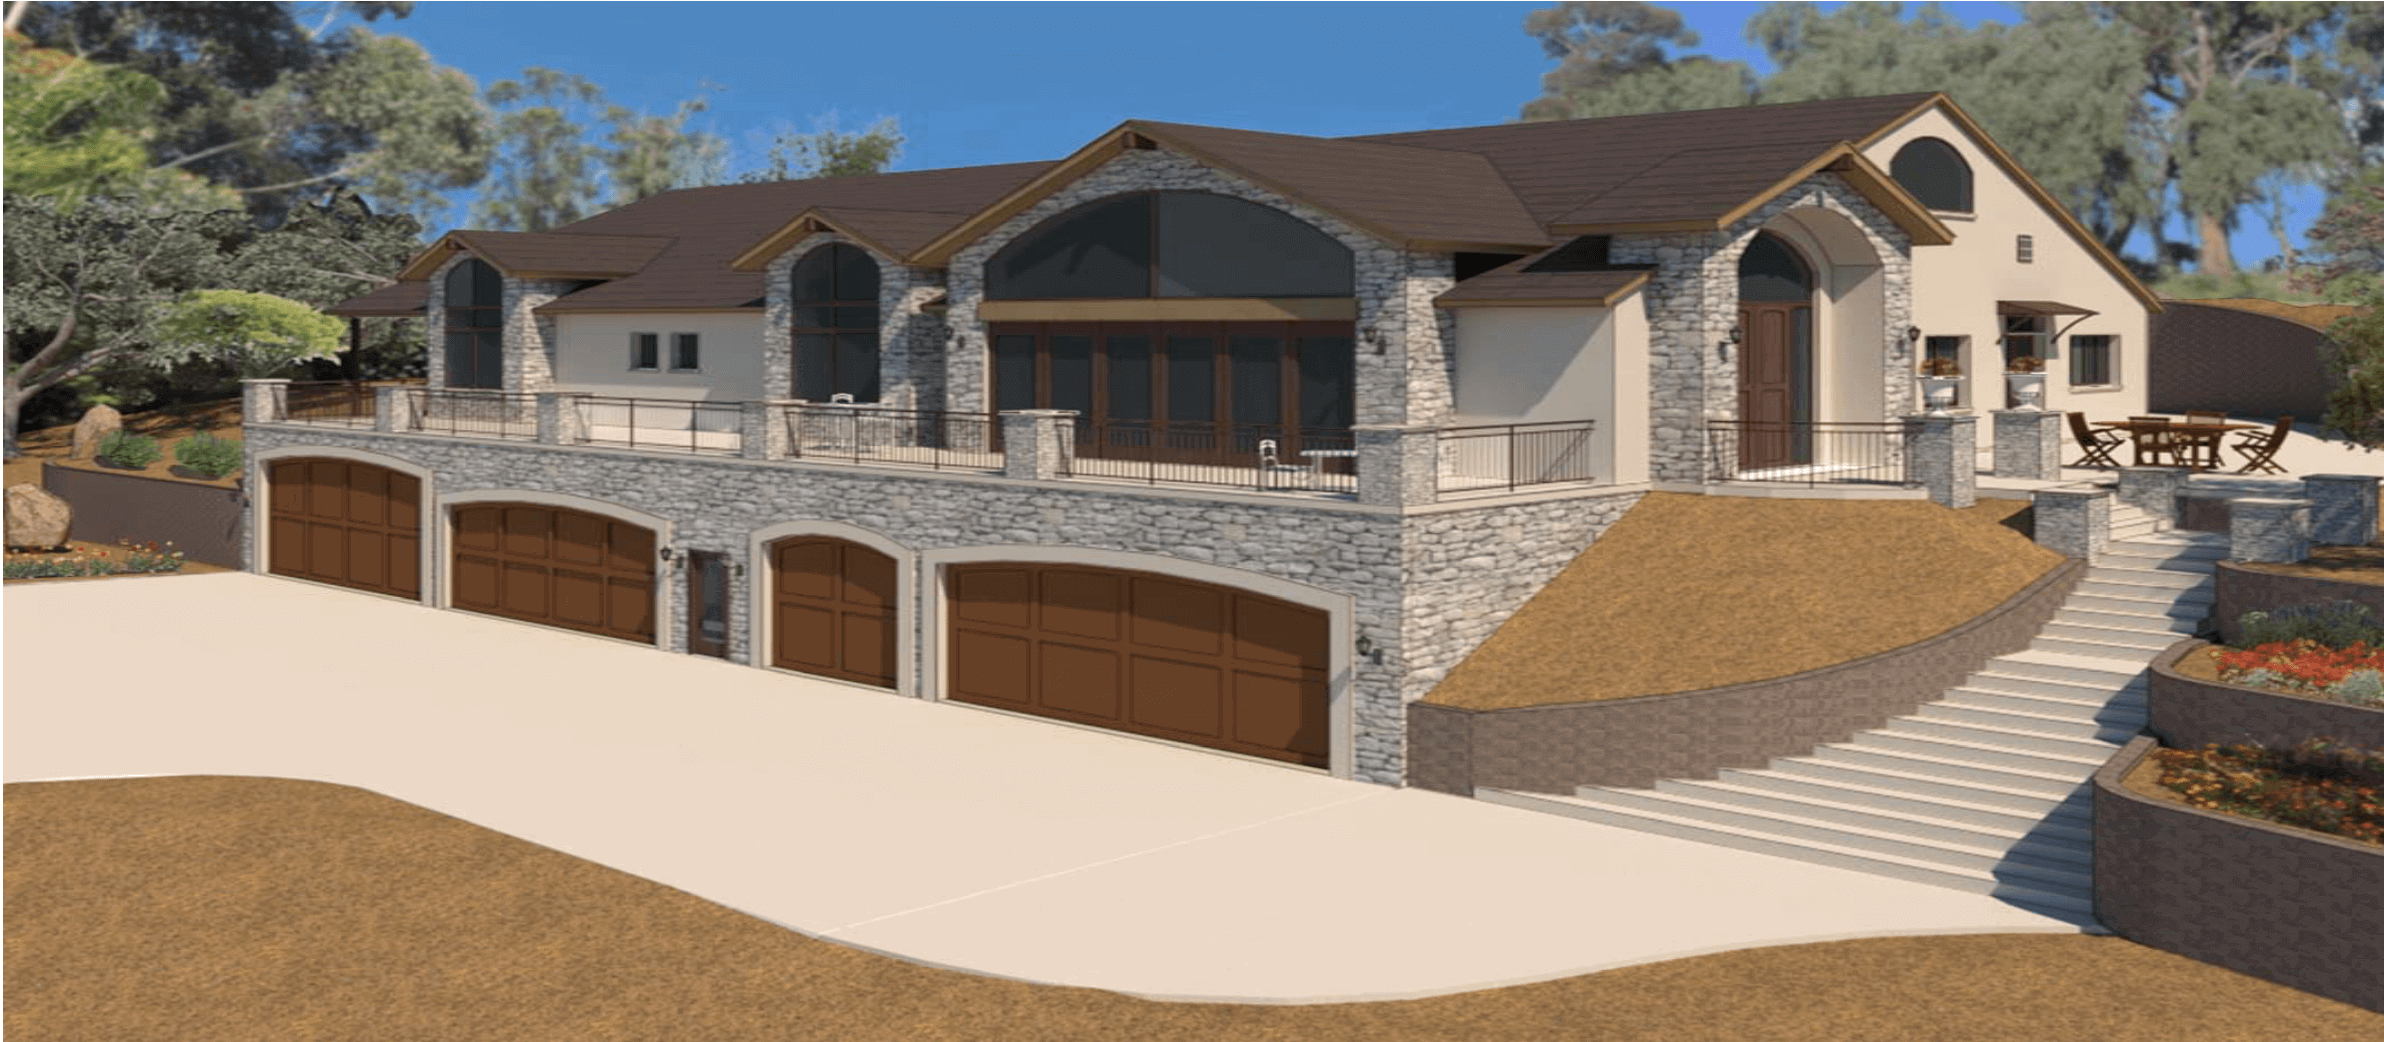 3-D image Single Family Residential New Construction at Valley Rd